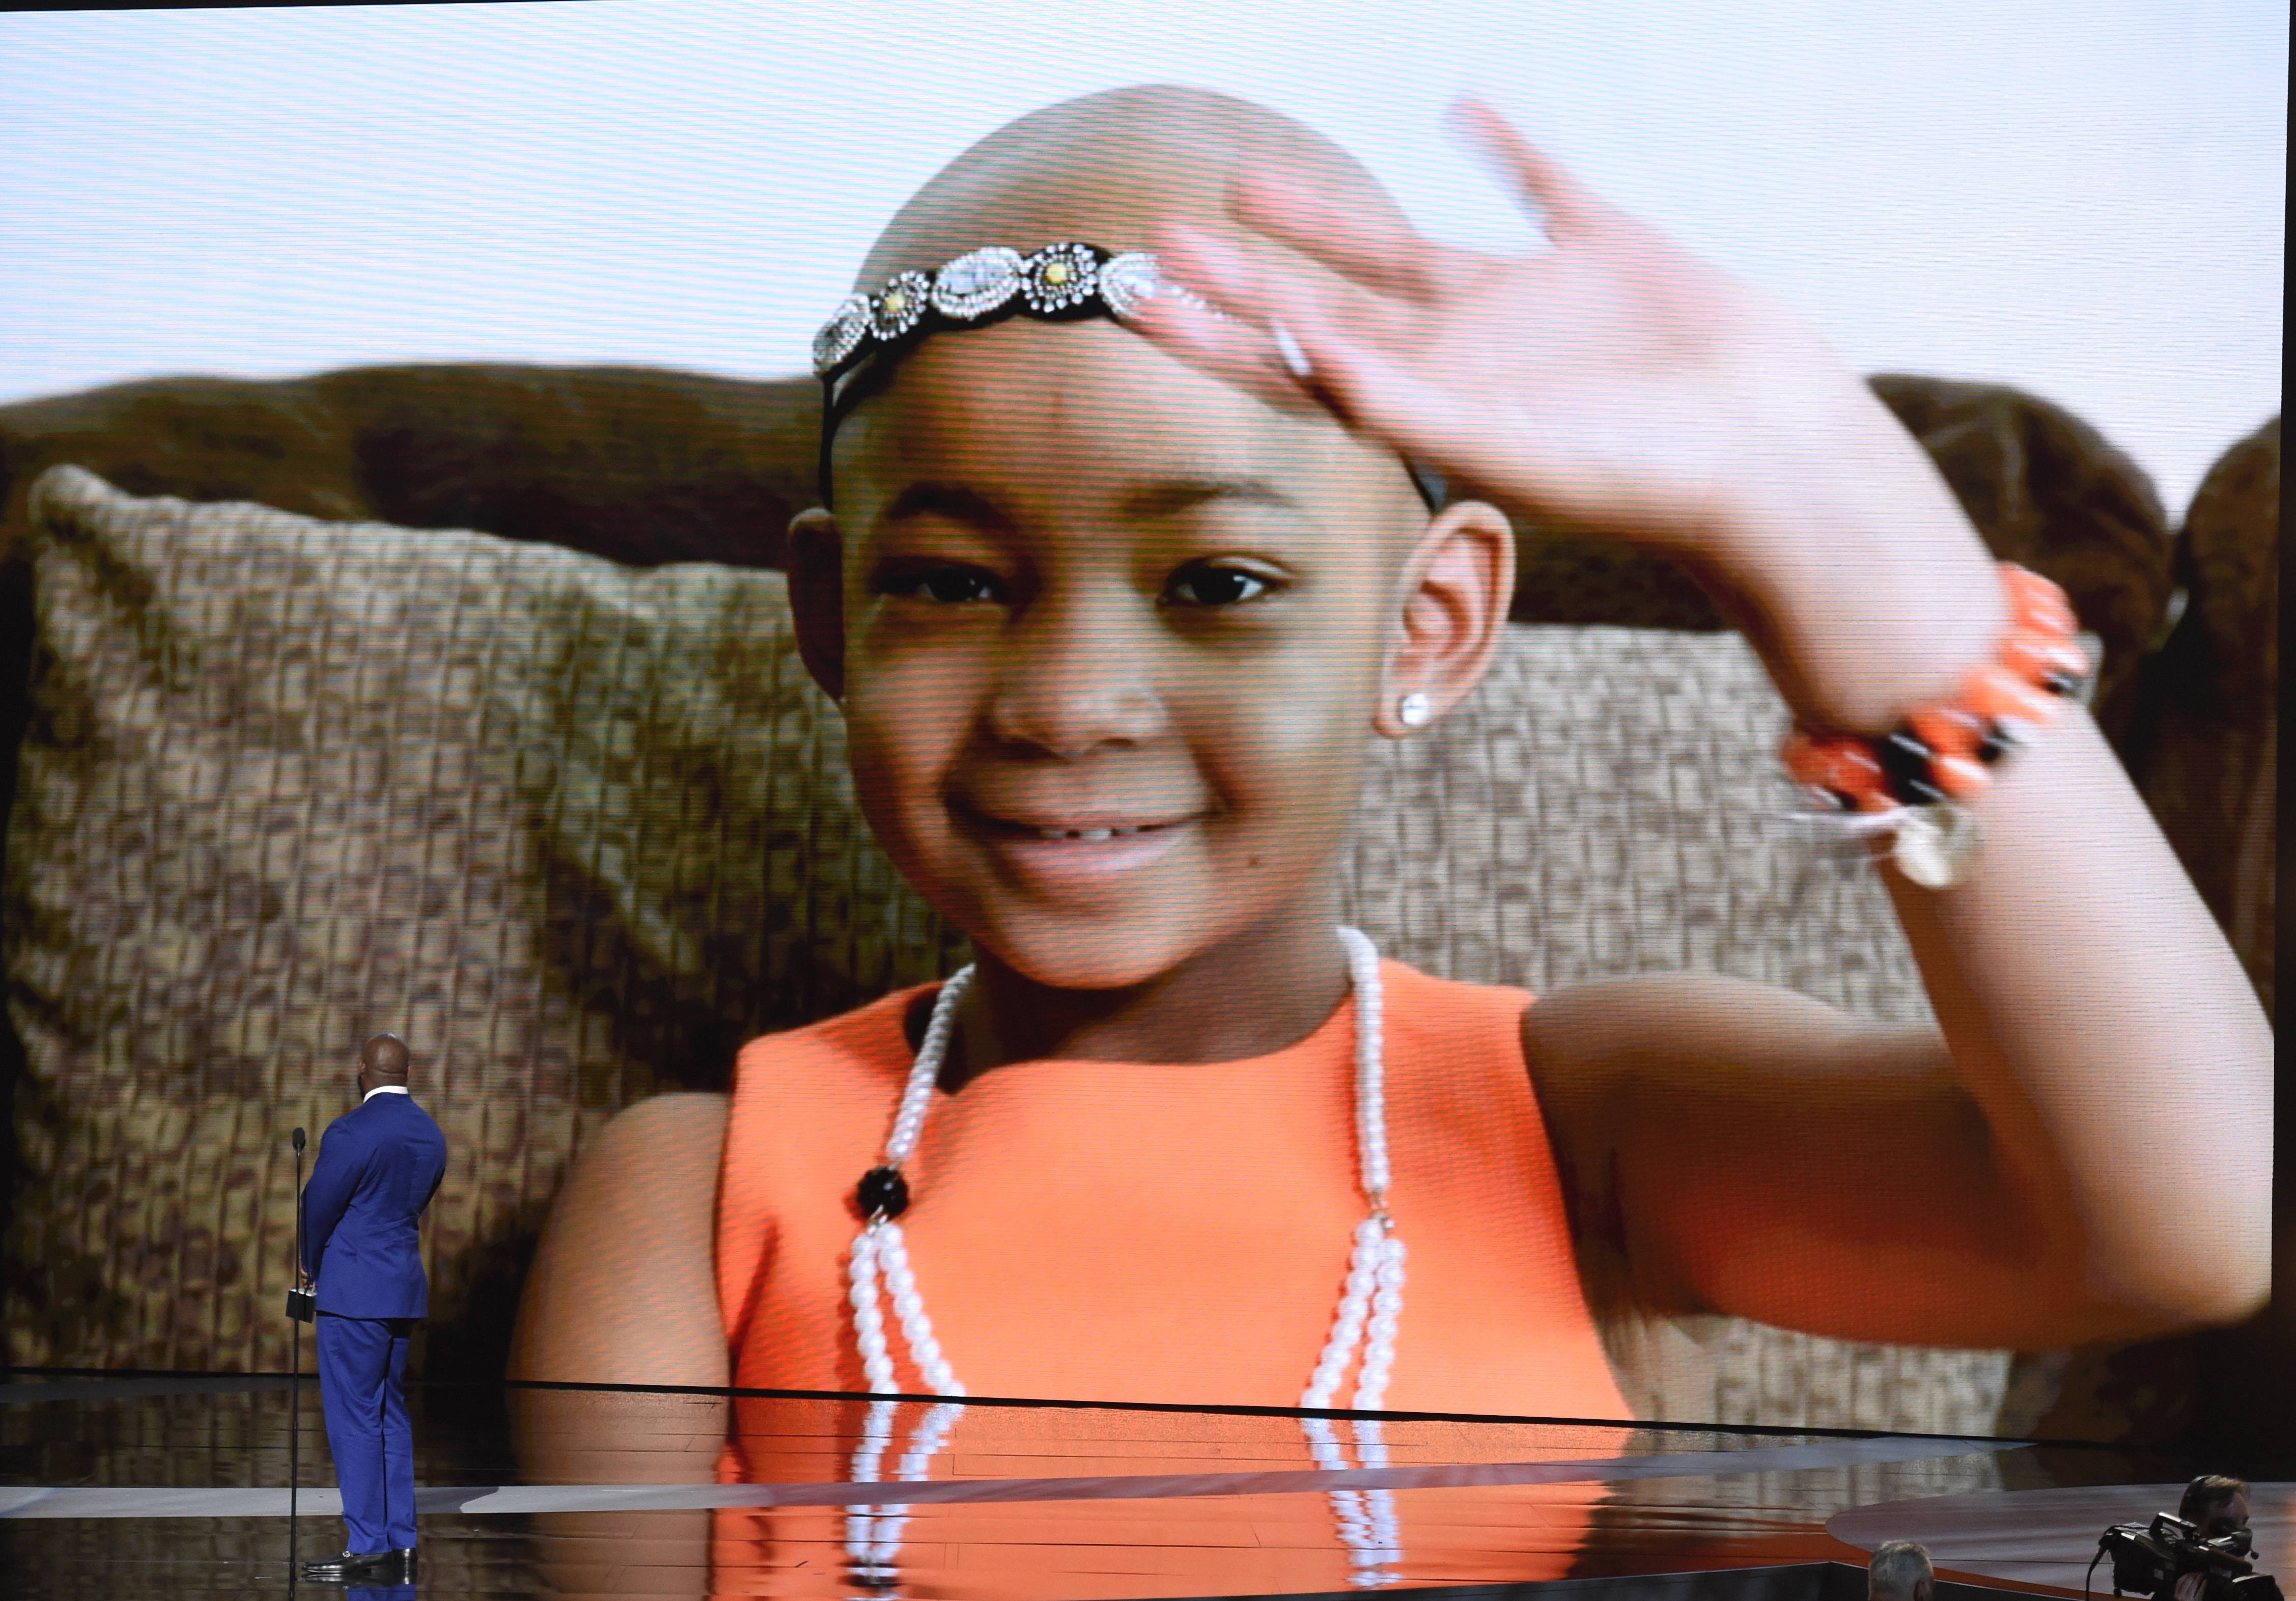 Leah Still on screen as her dad accepts the Jimmy V award for perseverance at the ESPY Awards.